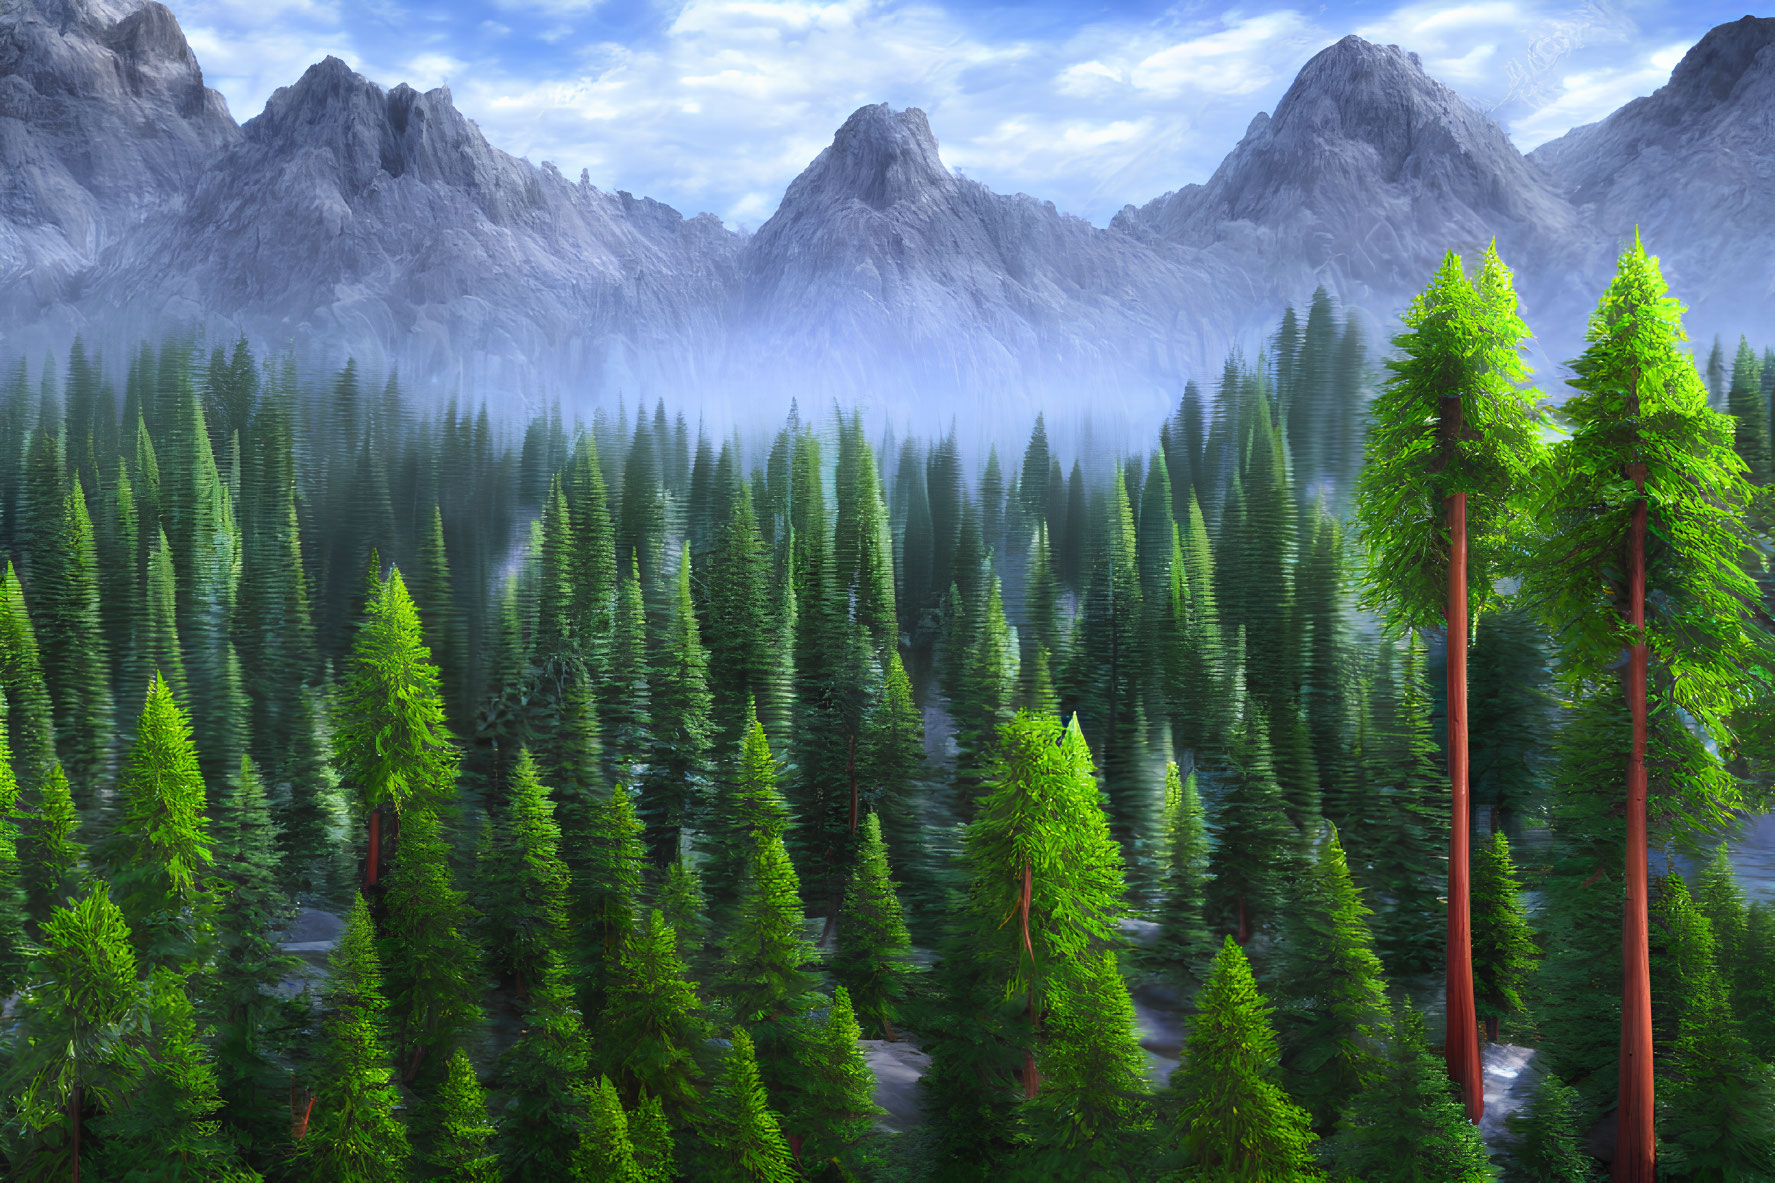 Misty evergreen forest with towering trees and rugged mountains under blue sky